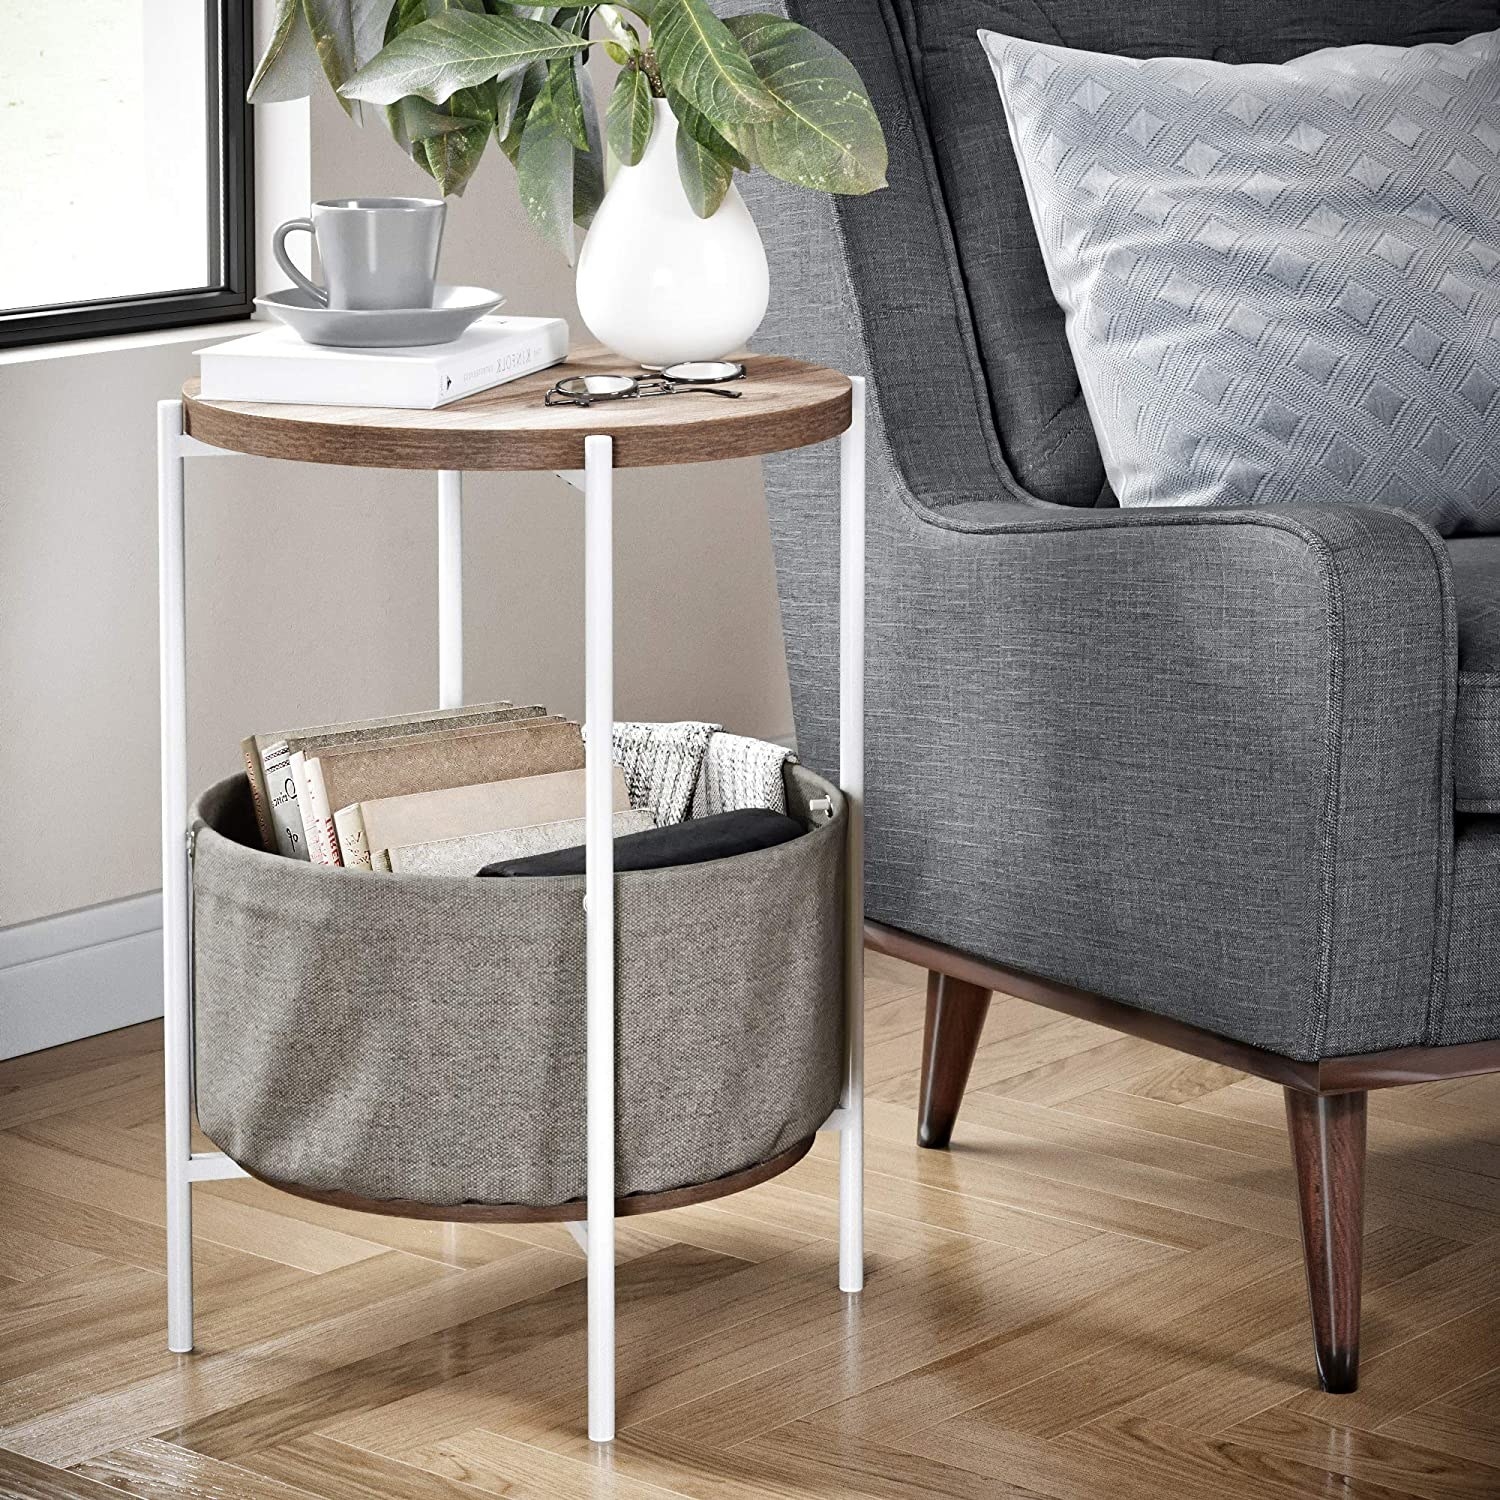 Round wooden end table with white legs and gray fabric storage bin underneath